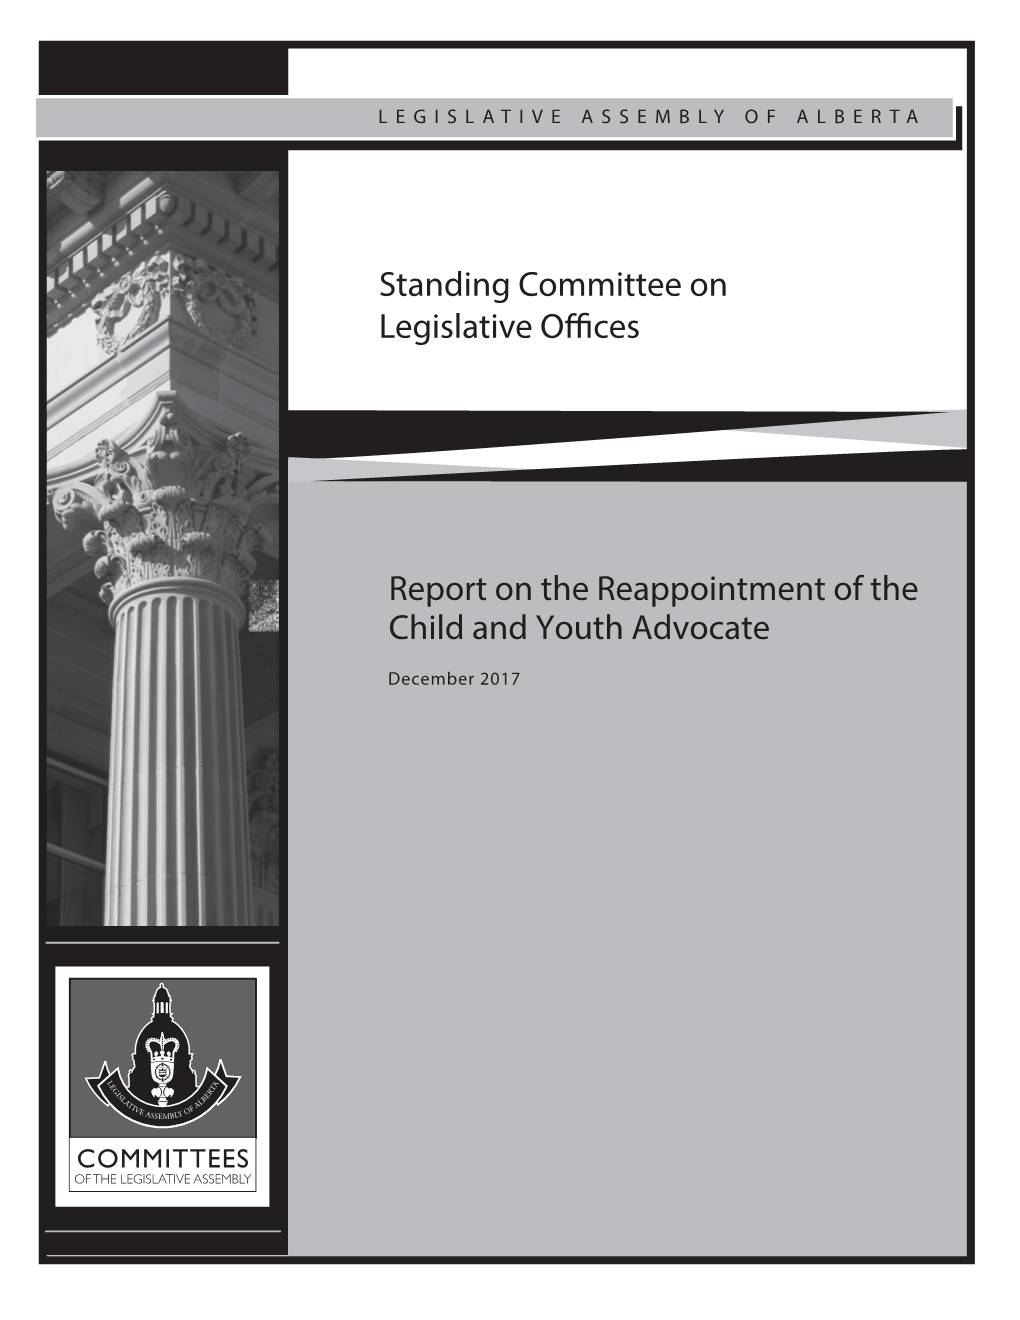 Report on the Reappointment of the Child and Youth Advocate